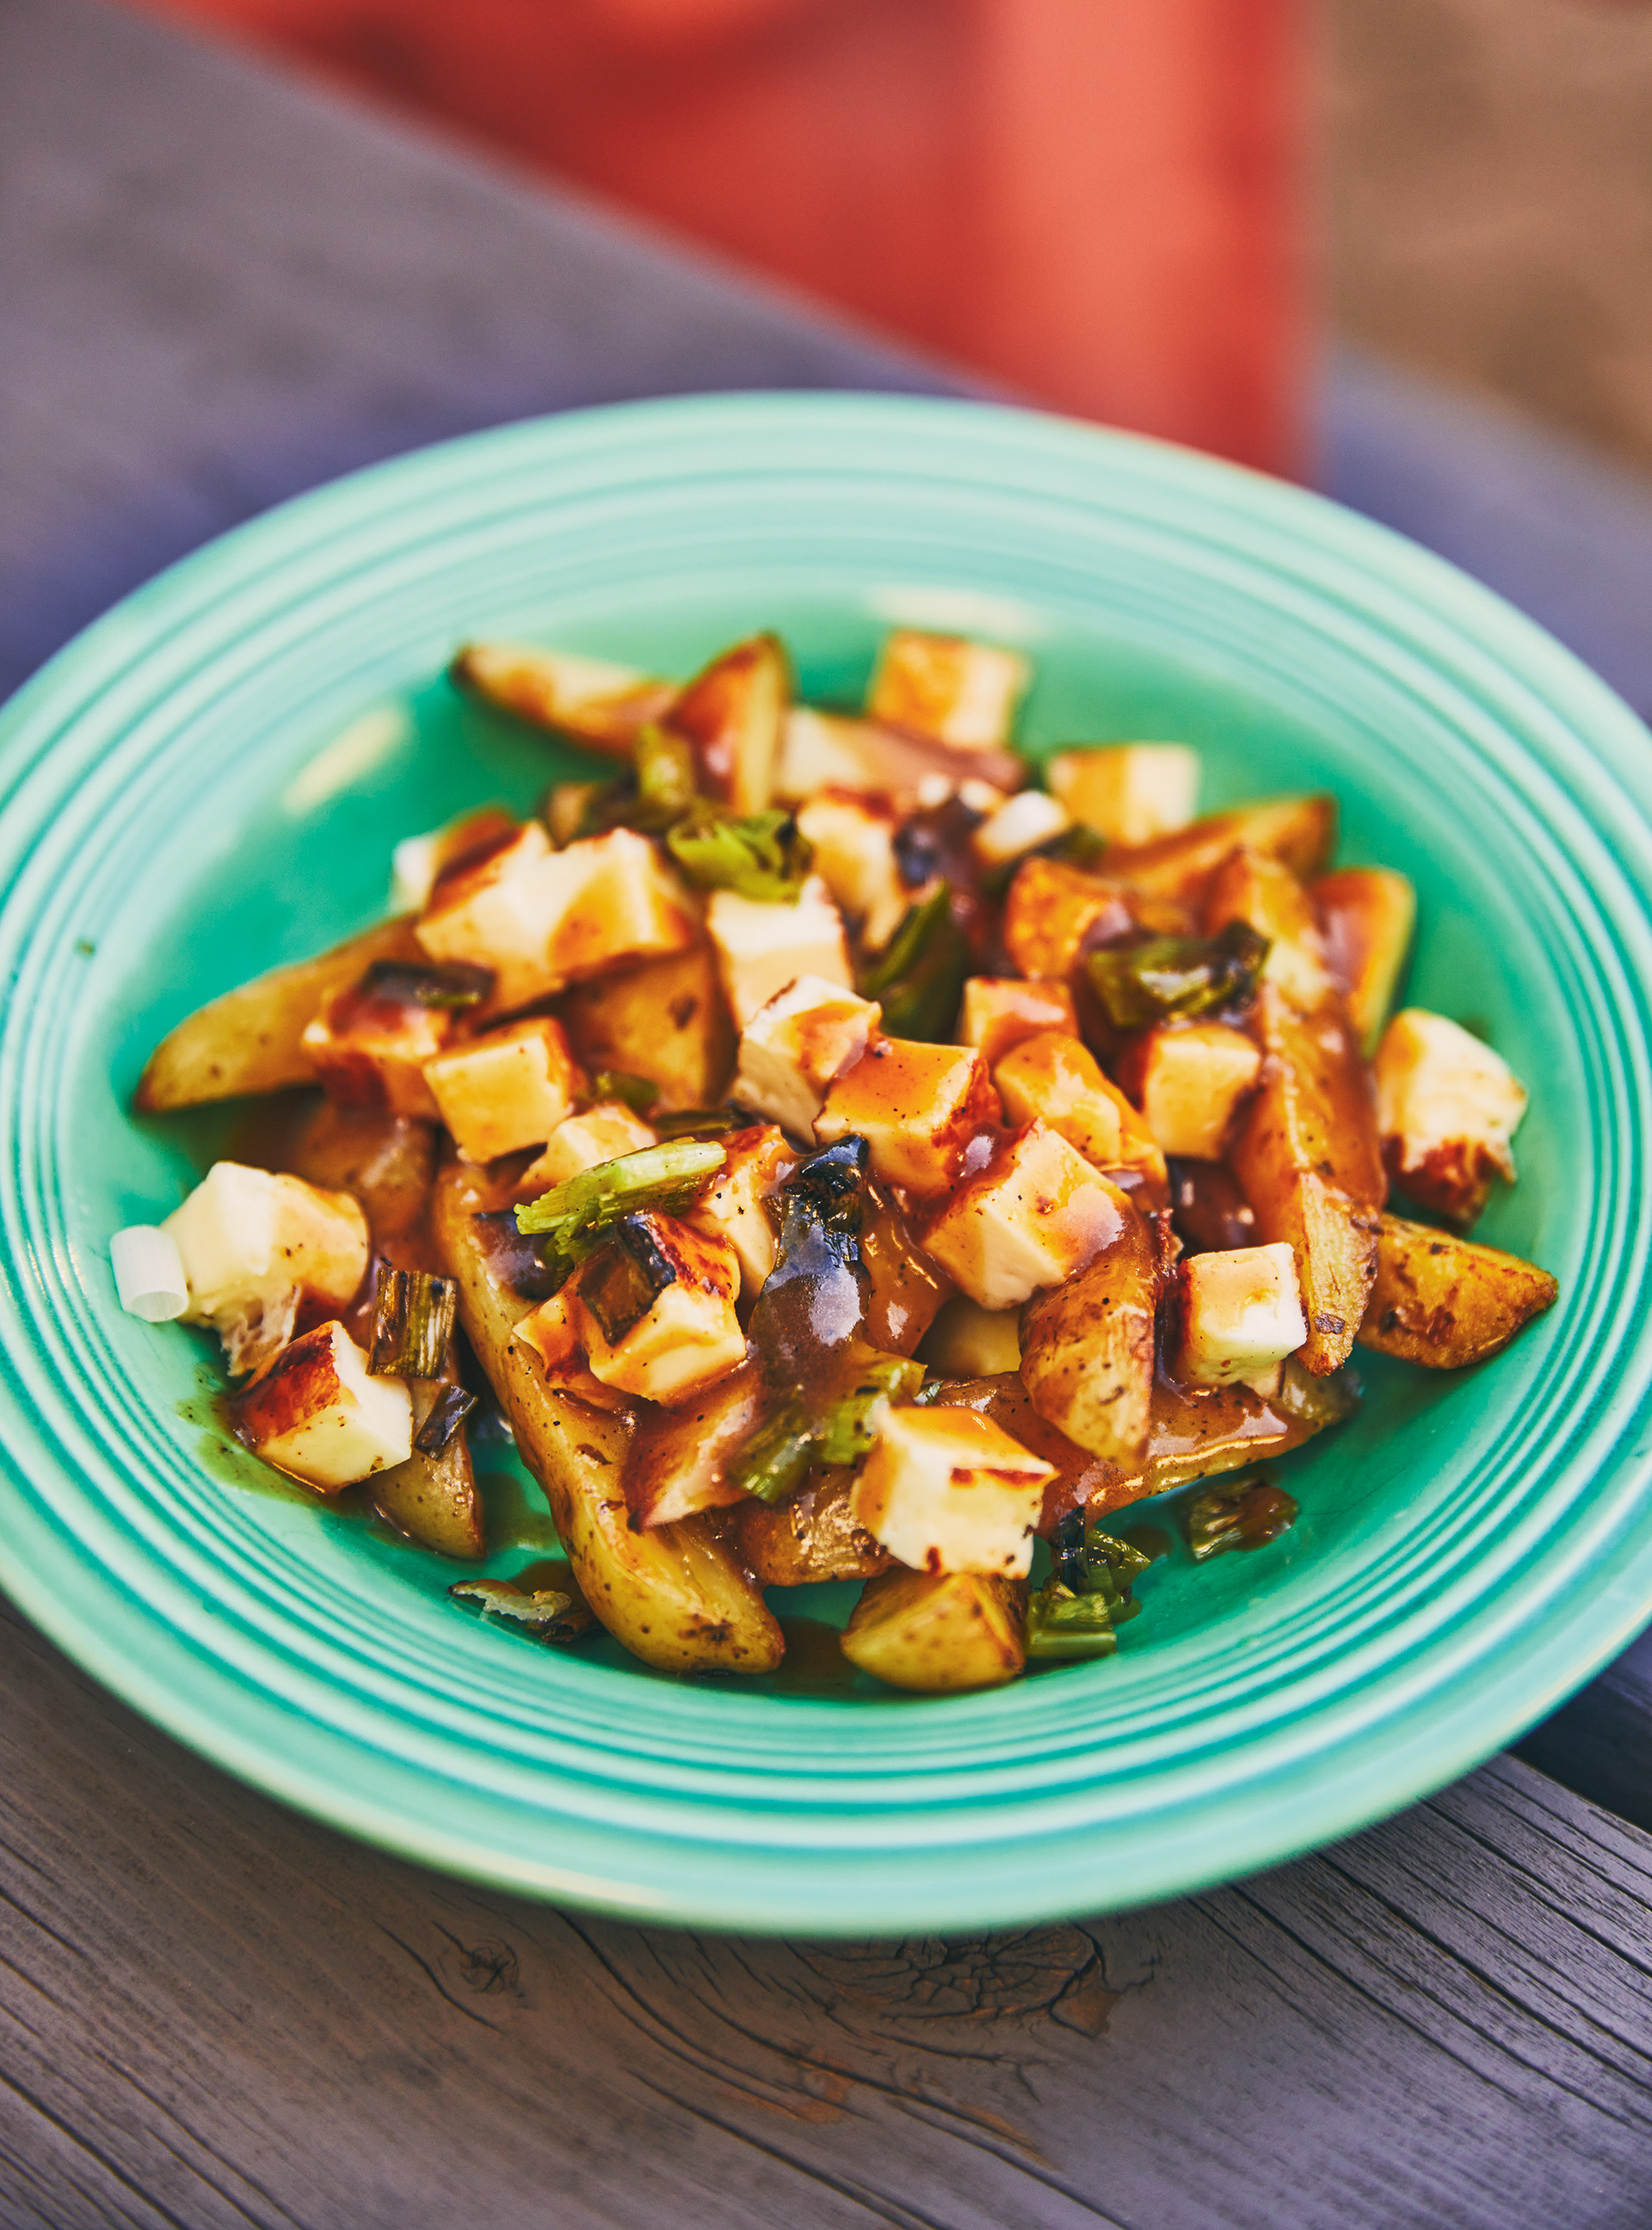 Vegetarian Poutine with Grilled Halloumi